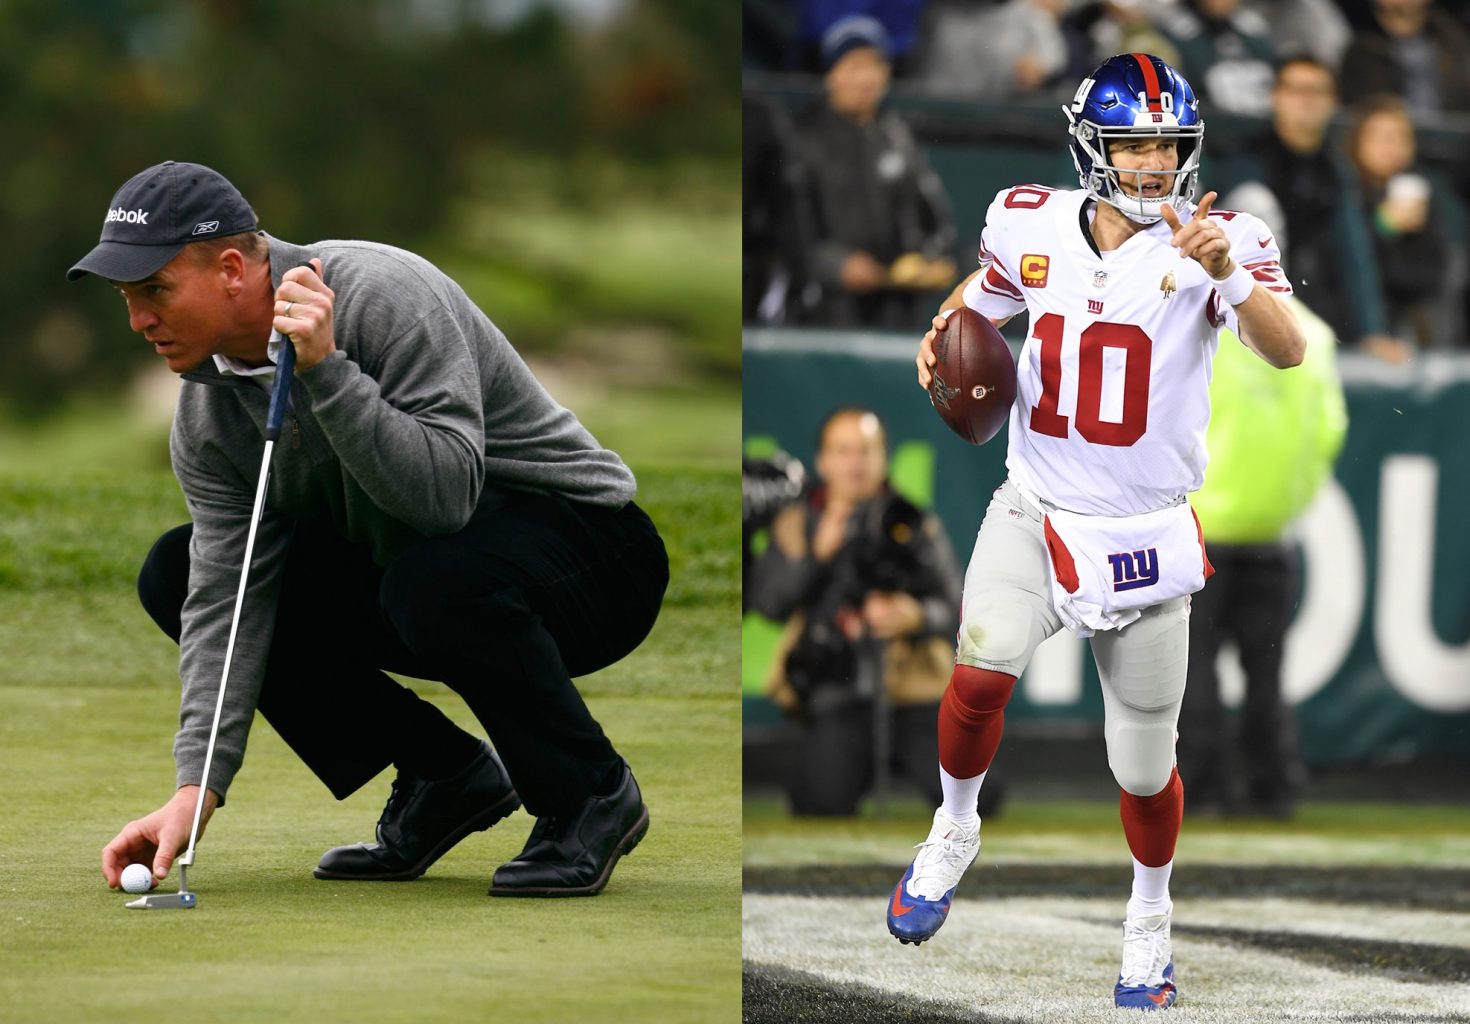 Peyton Manning setting up a golf ball and Eli Manning running holding a football